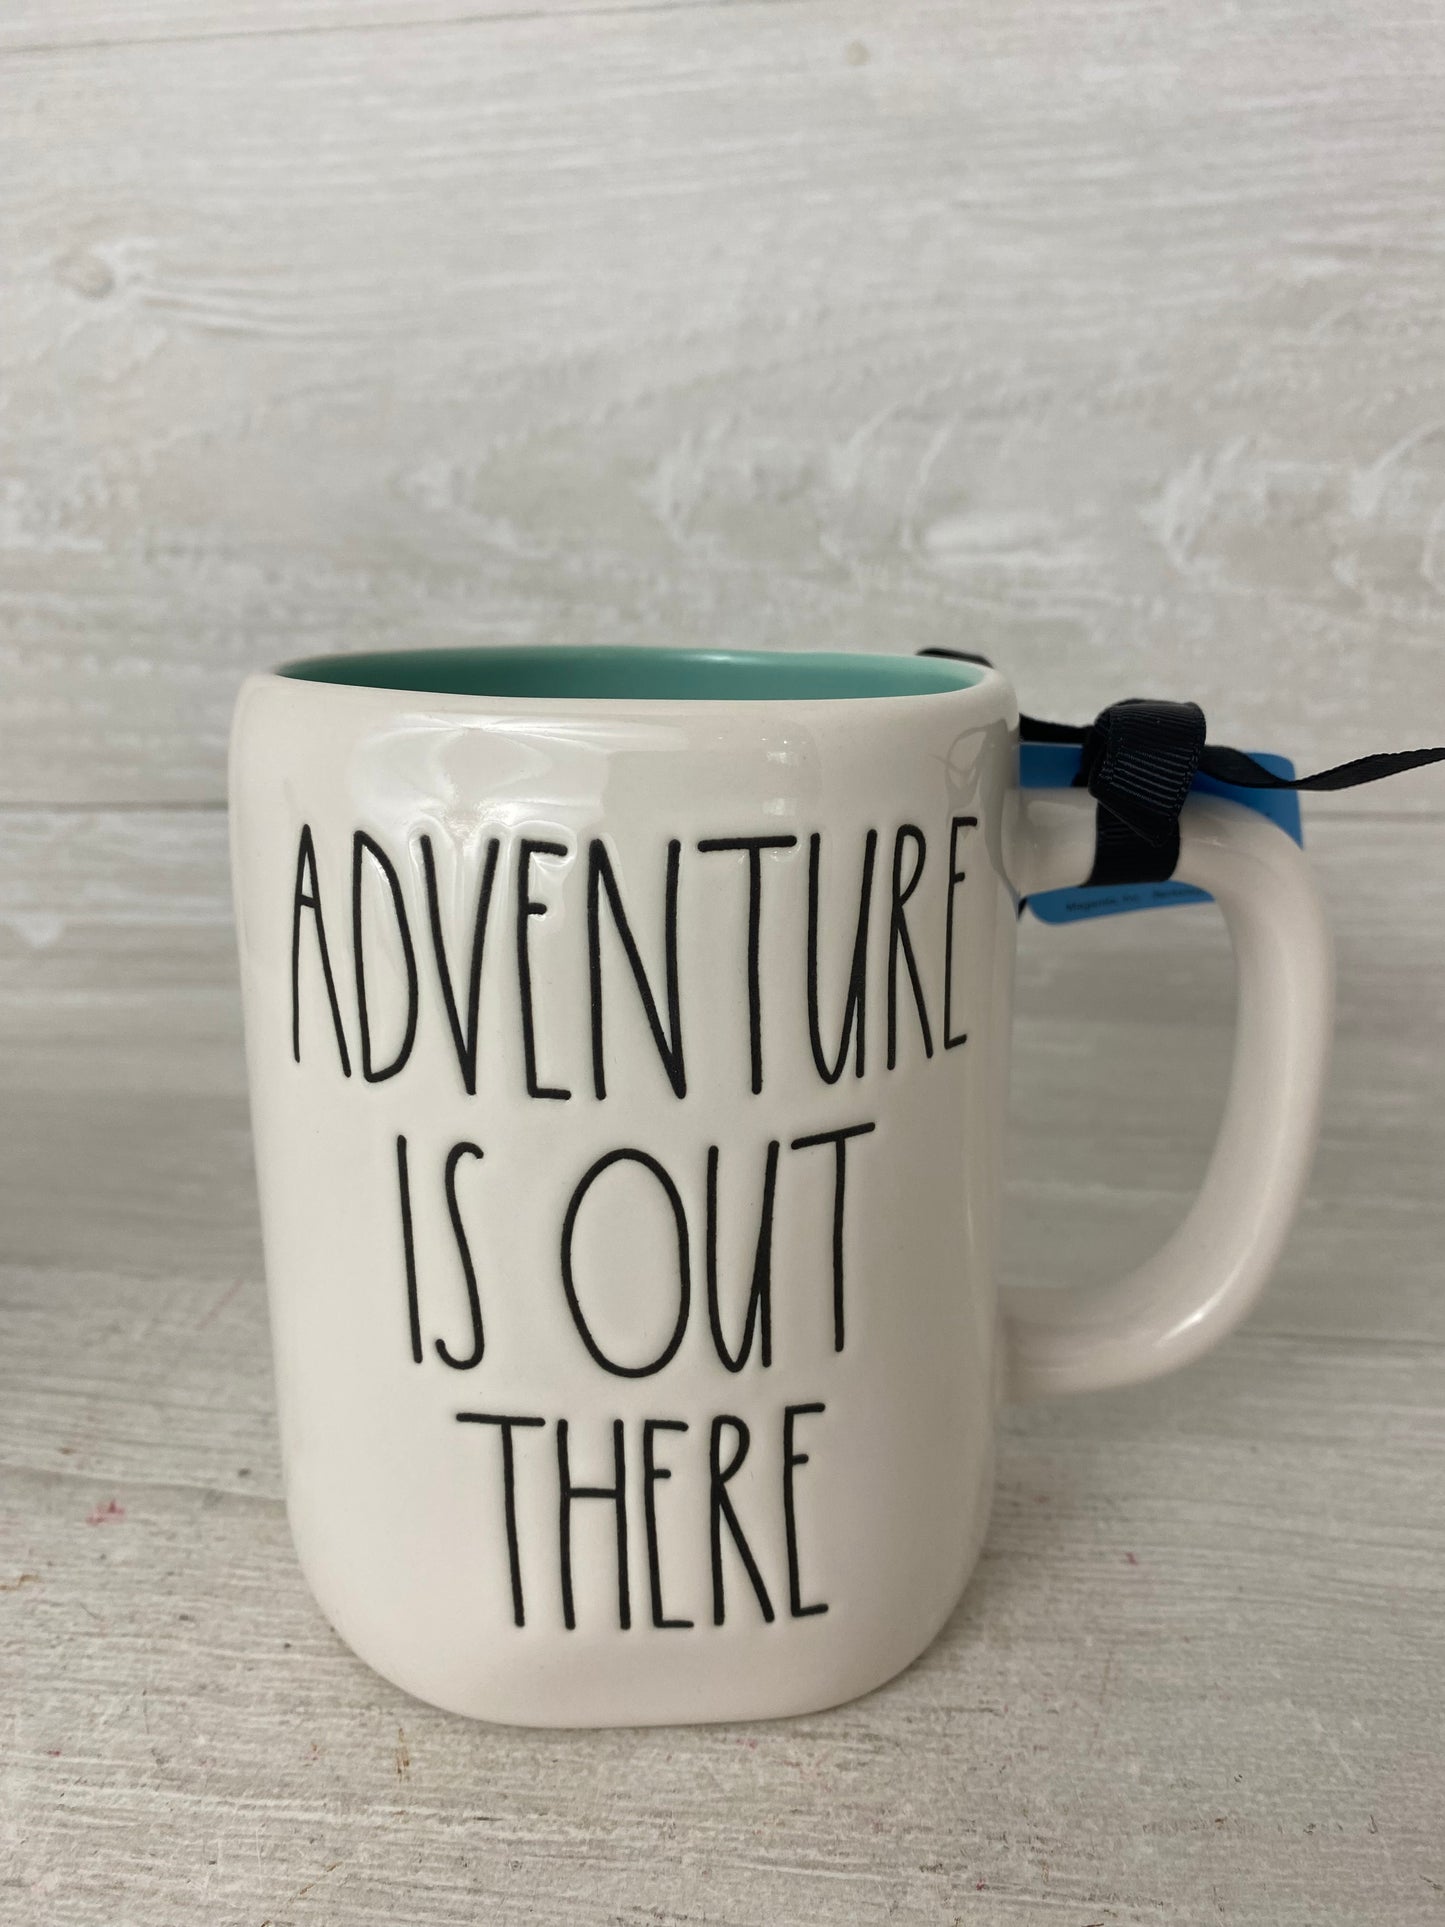 Rae Dunn Up "Adventure Is Out There" Mug